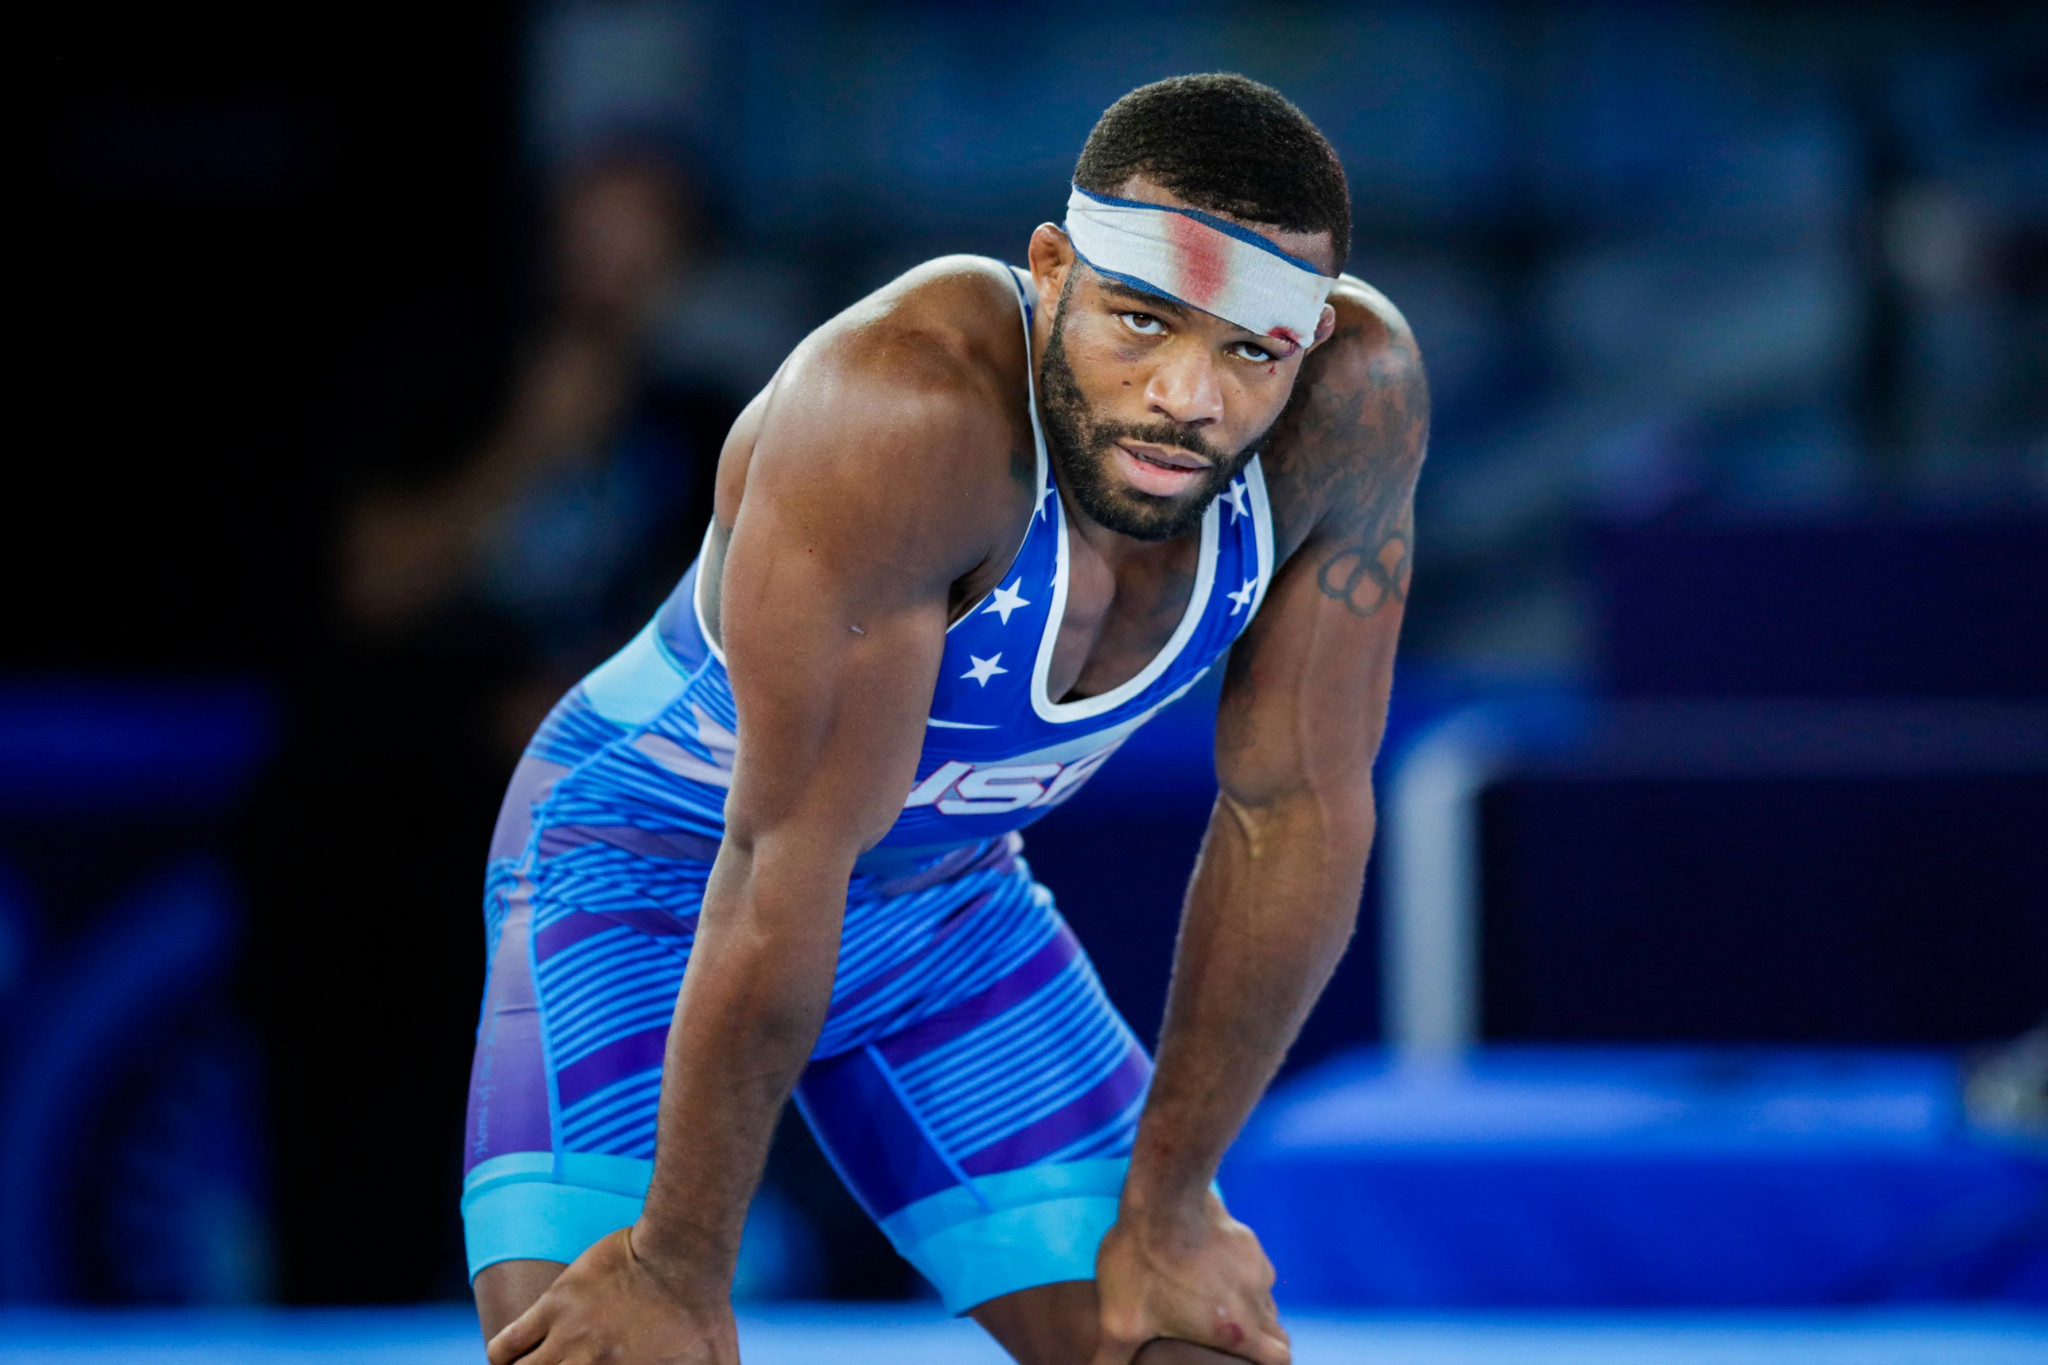 Jordan Burroughs of the United States believes he can qualify for Paris, 12 years after his Olympic gold in London ©Getty Images